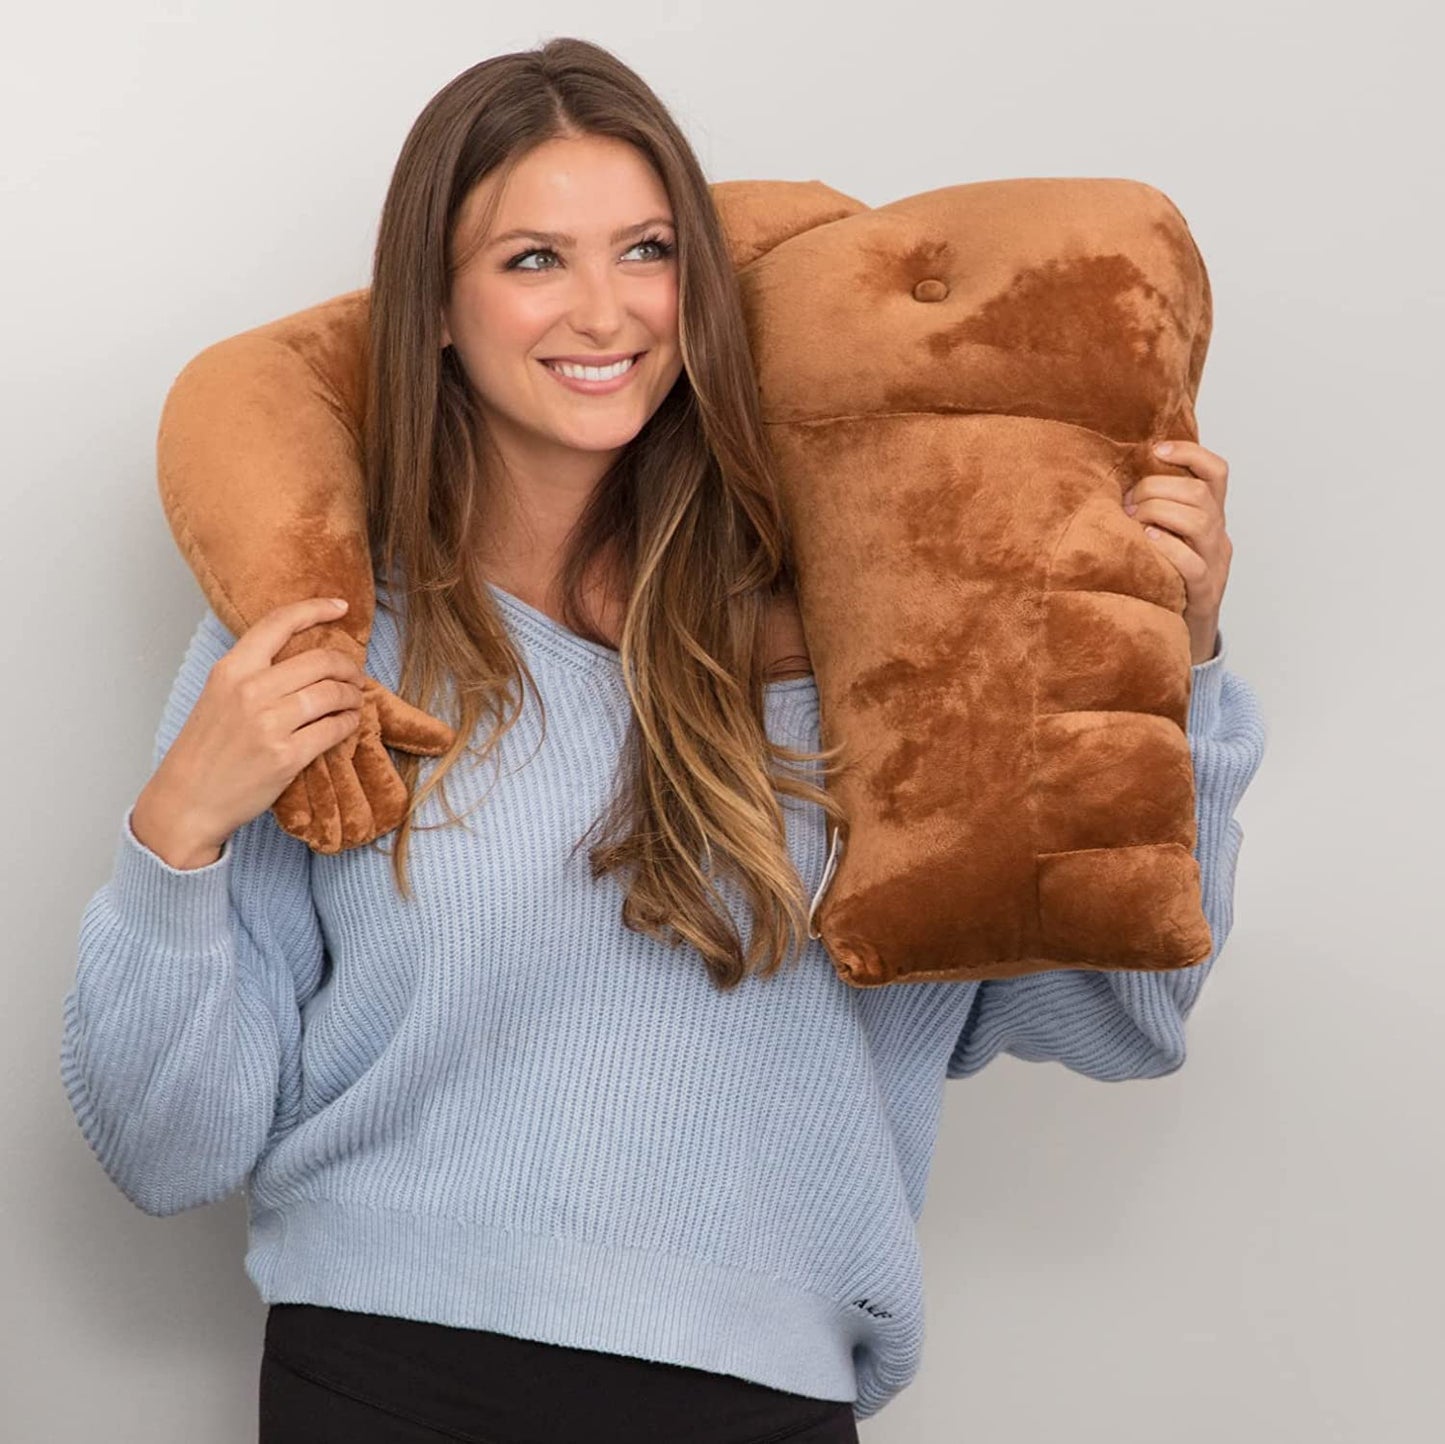 A woman has a muscle man pillow wrapped around her shoulders.